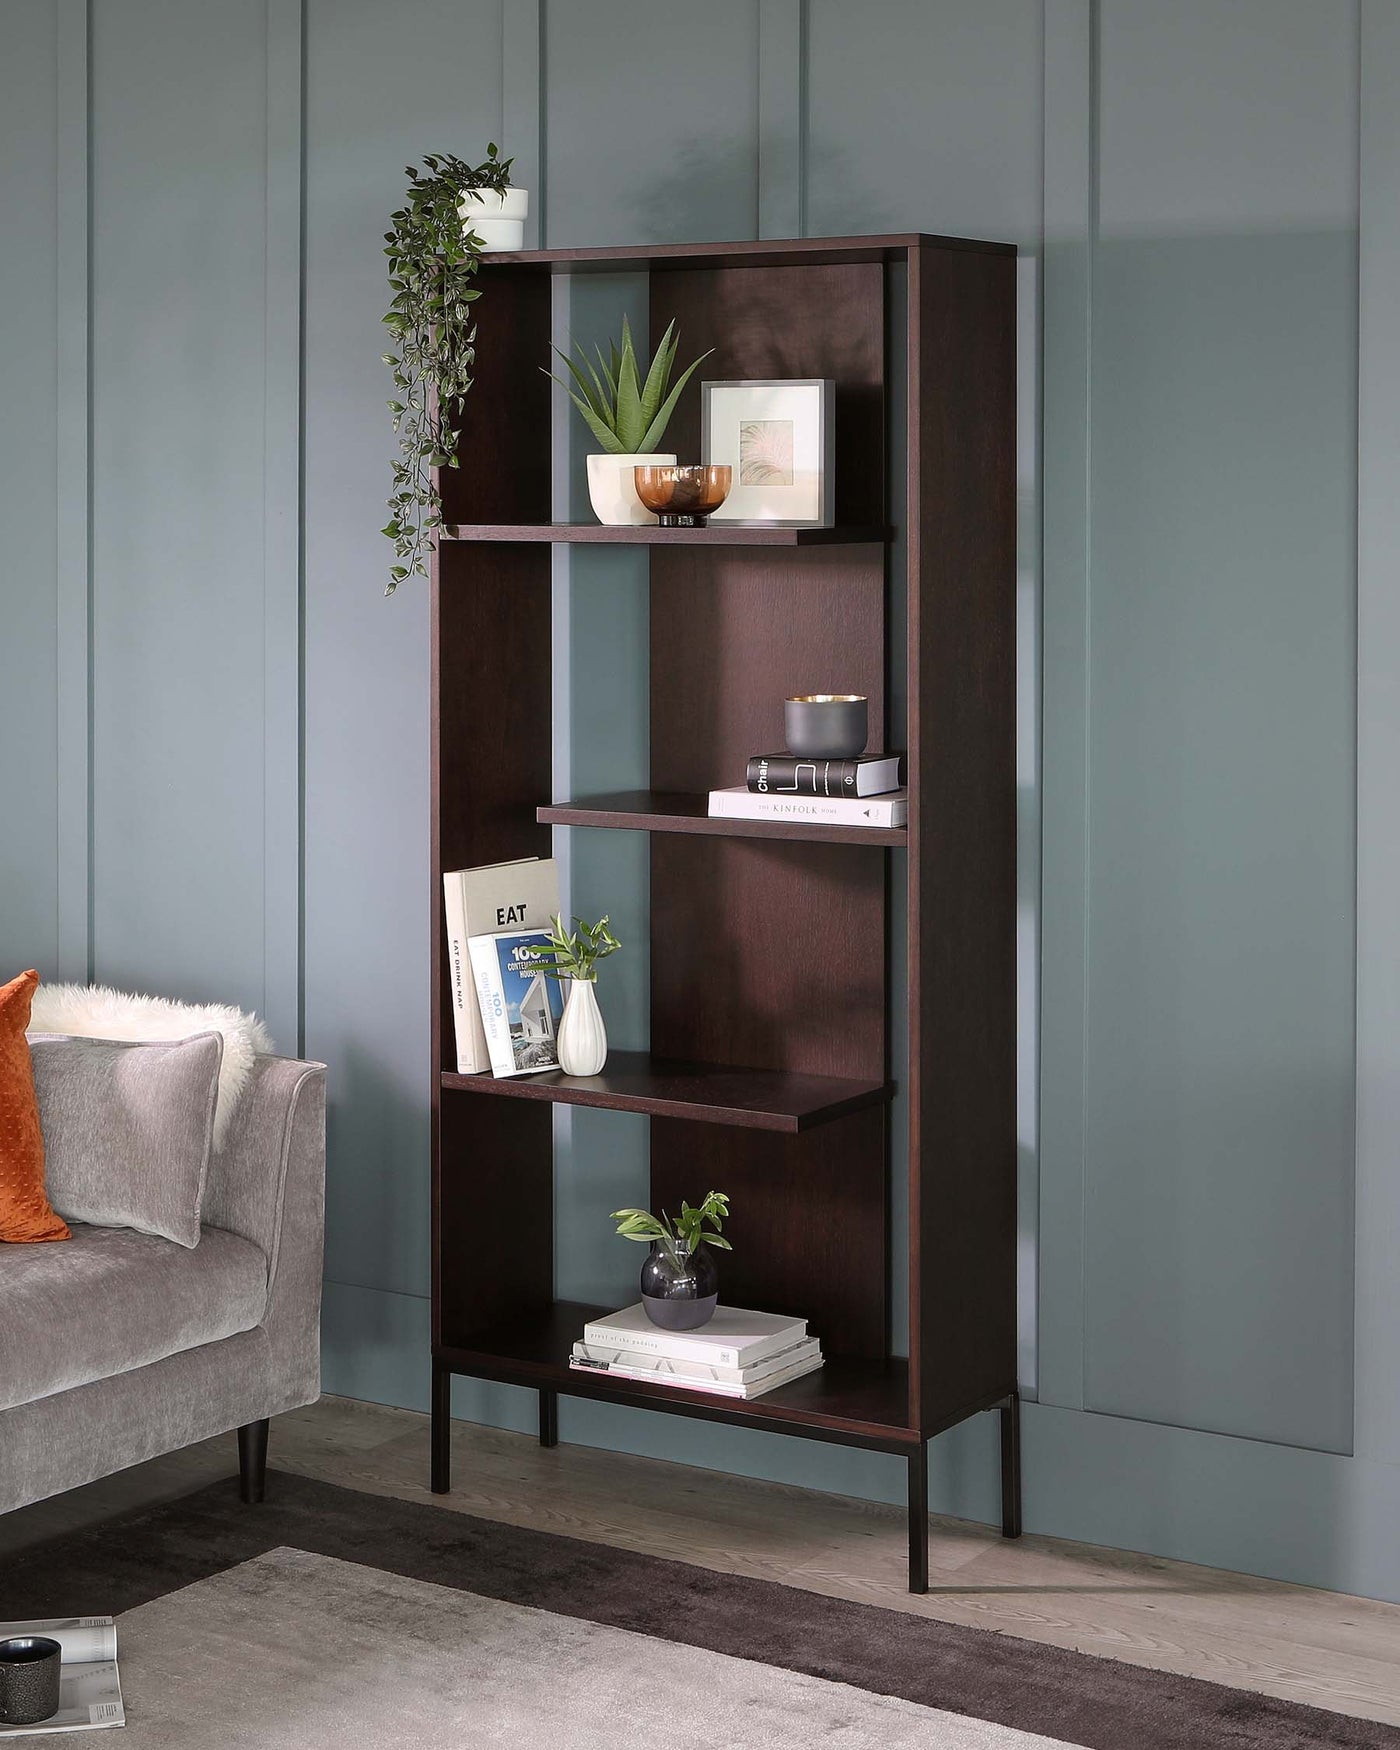 A modern five-tiered dark wood bookshelf with an asymmetrical design, featuring various decorative items on its shelves, against a teal wall. The shelving unit has a sleek silhouette with open back and sides, allowing for versatile placement in a room.